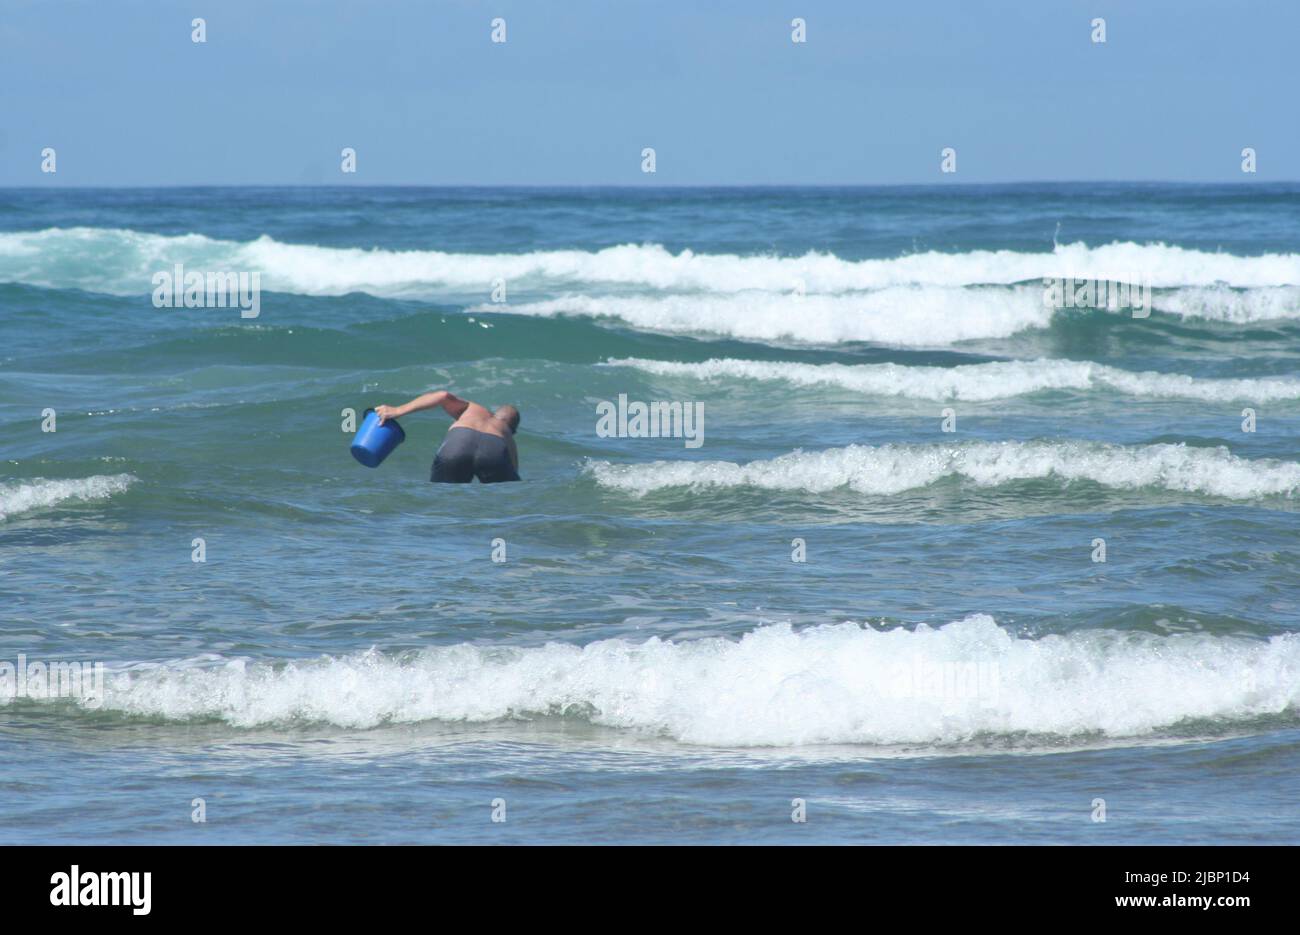 A man collecting fresh seafood in the surf off Ninety-mile Beach, New Zealand Stock Photo